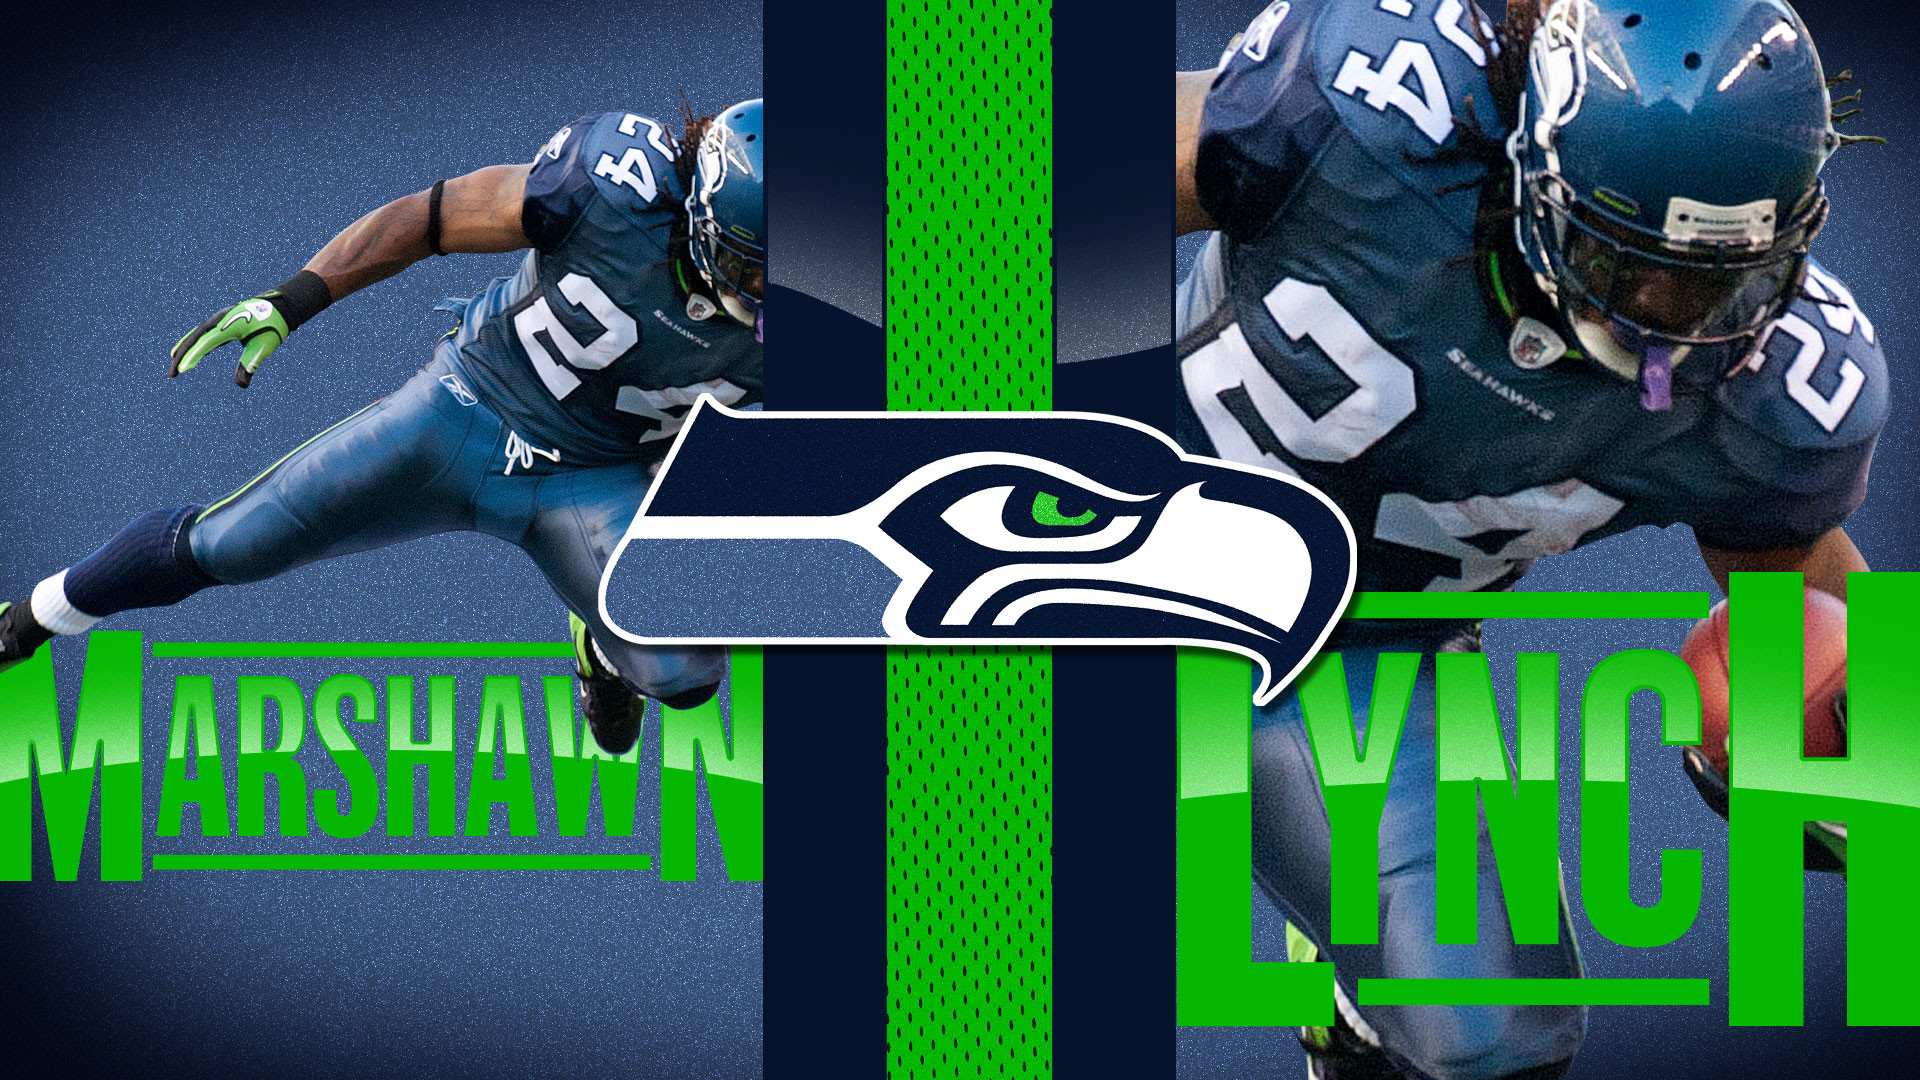 1920x1080 Widescreen Wallpapers of Seahawks, Nice Image